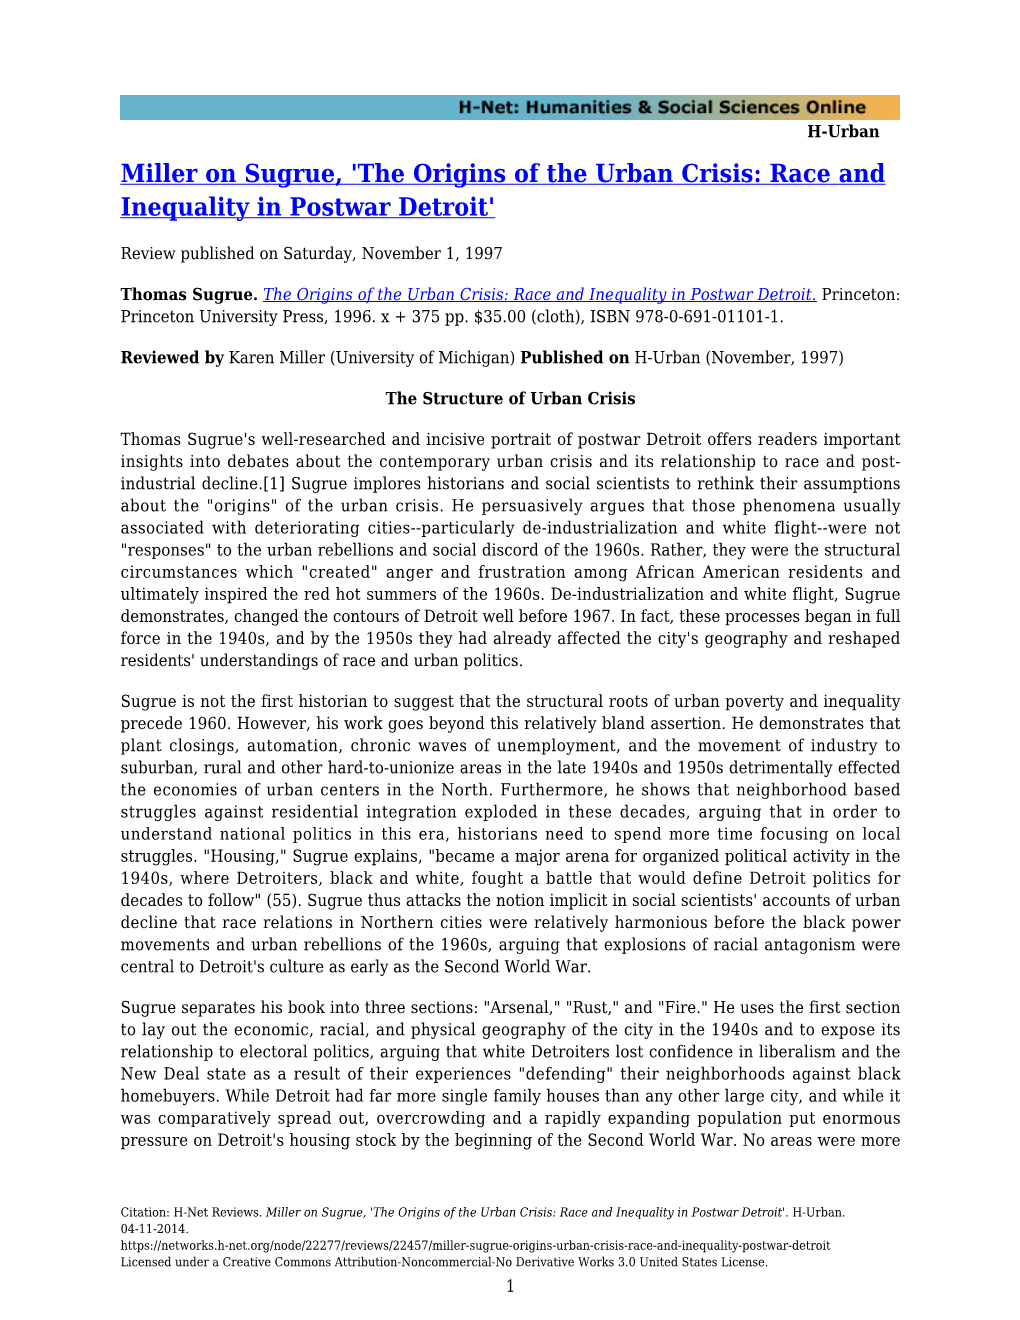 Miller on Sugrue, 'The Origins of the Urban Crisis: Race and Inequality in Postwar Detroit'